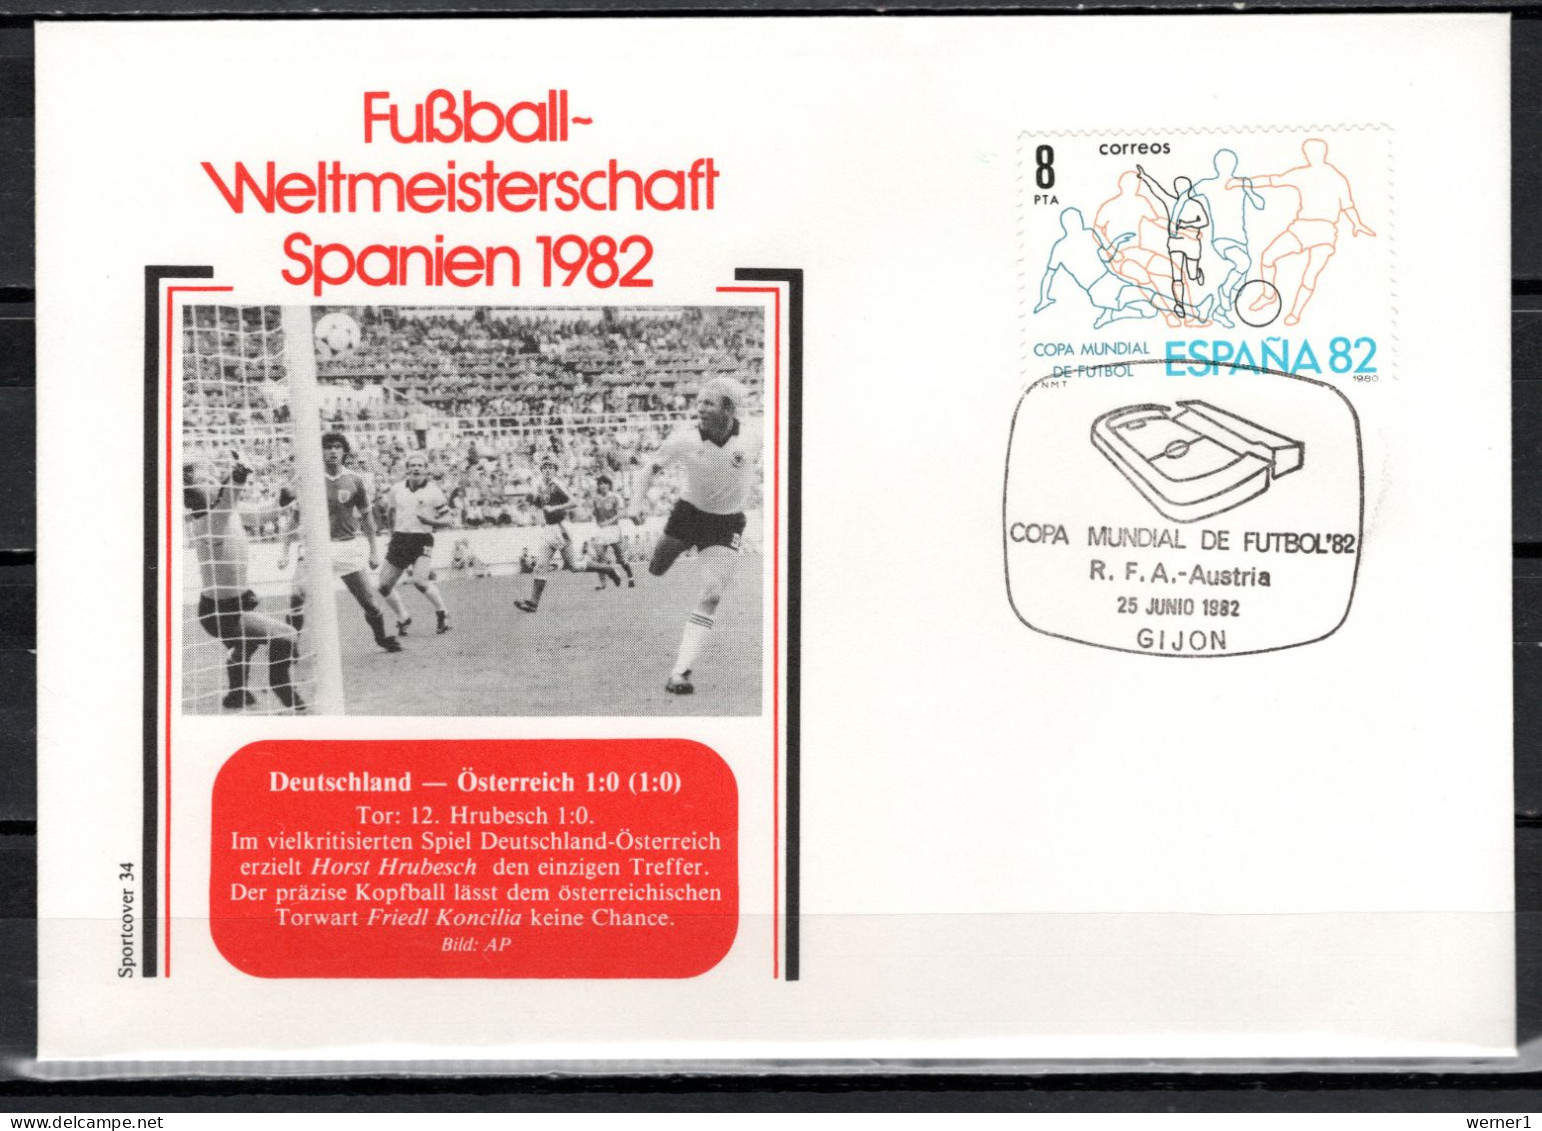 Spain 1982 Football Soccer World Cup Commemorative Cover Match Germany - Austria 1:0 - 1982 – Espagne